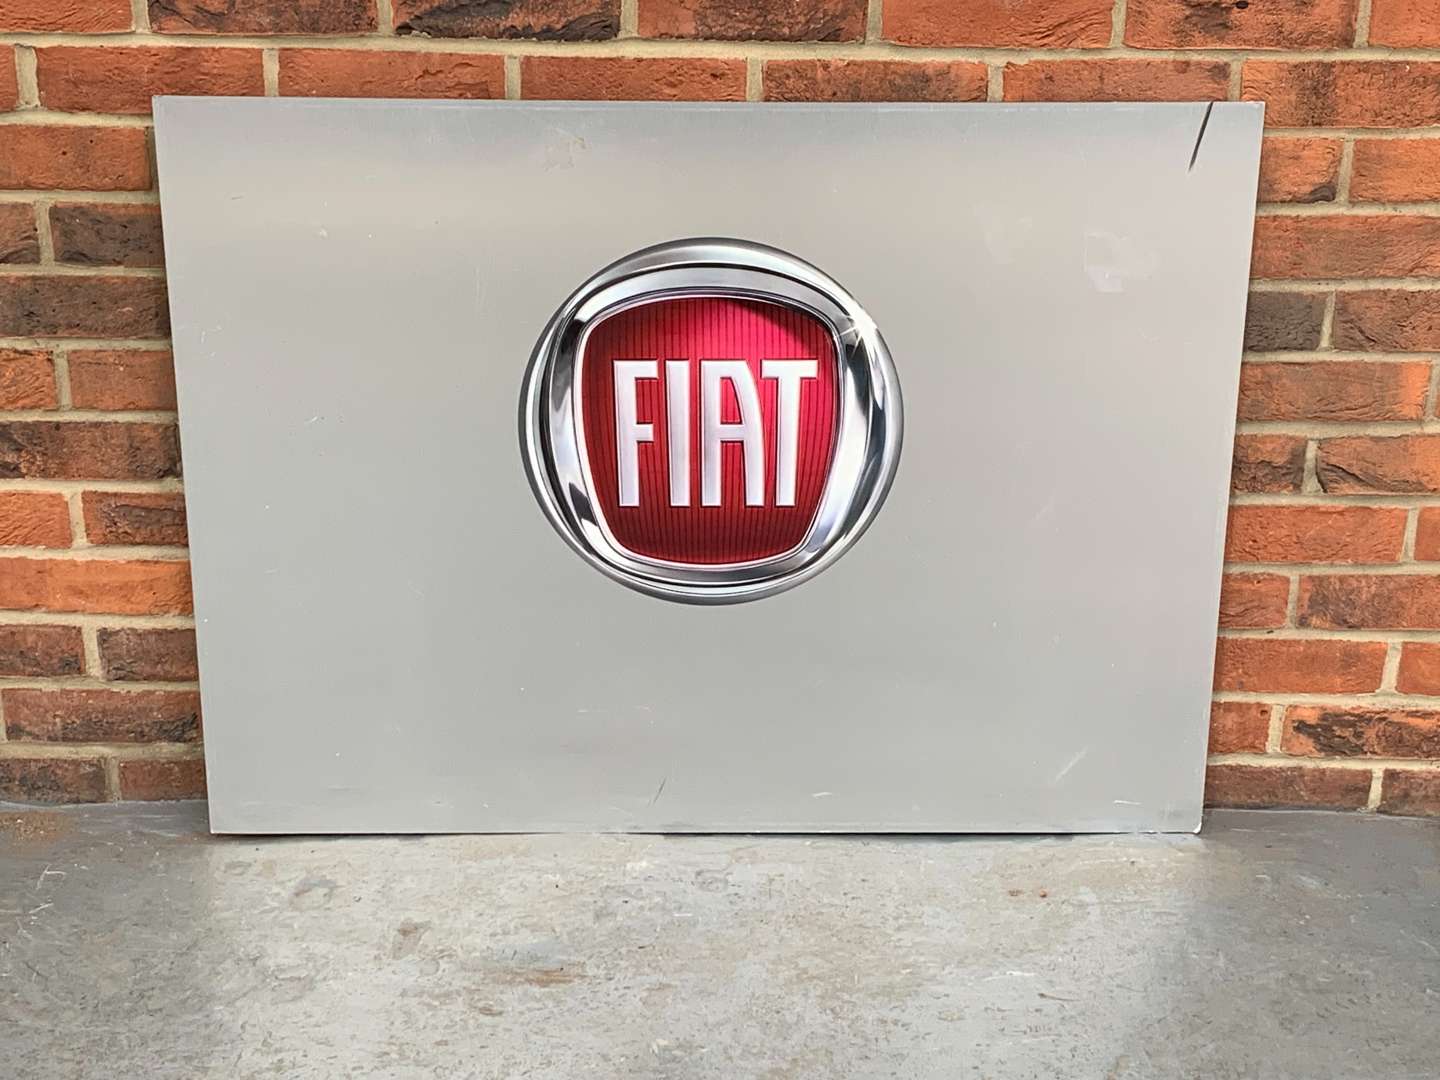 <p>Fiat Sign on Metal Board</p>